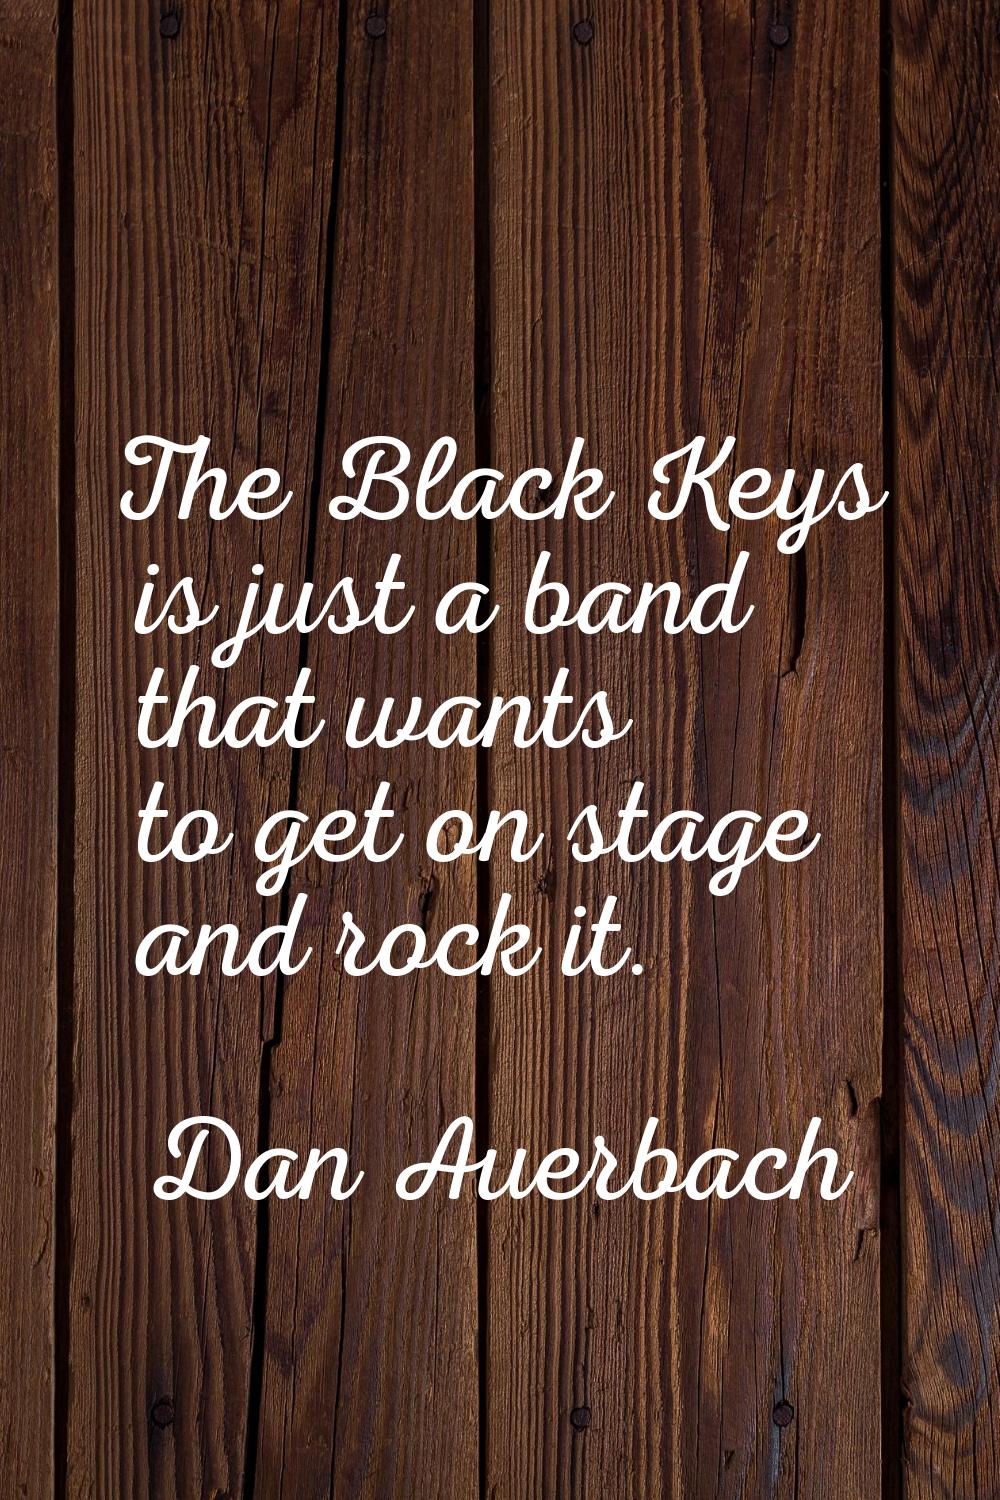 The Black Keys is just a band that wants to get on stage and rock it.